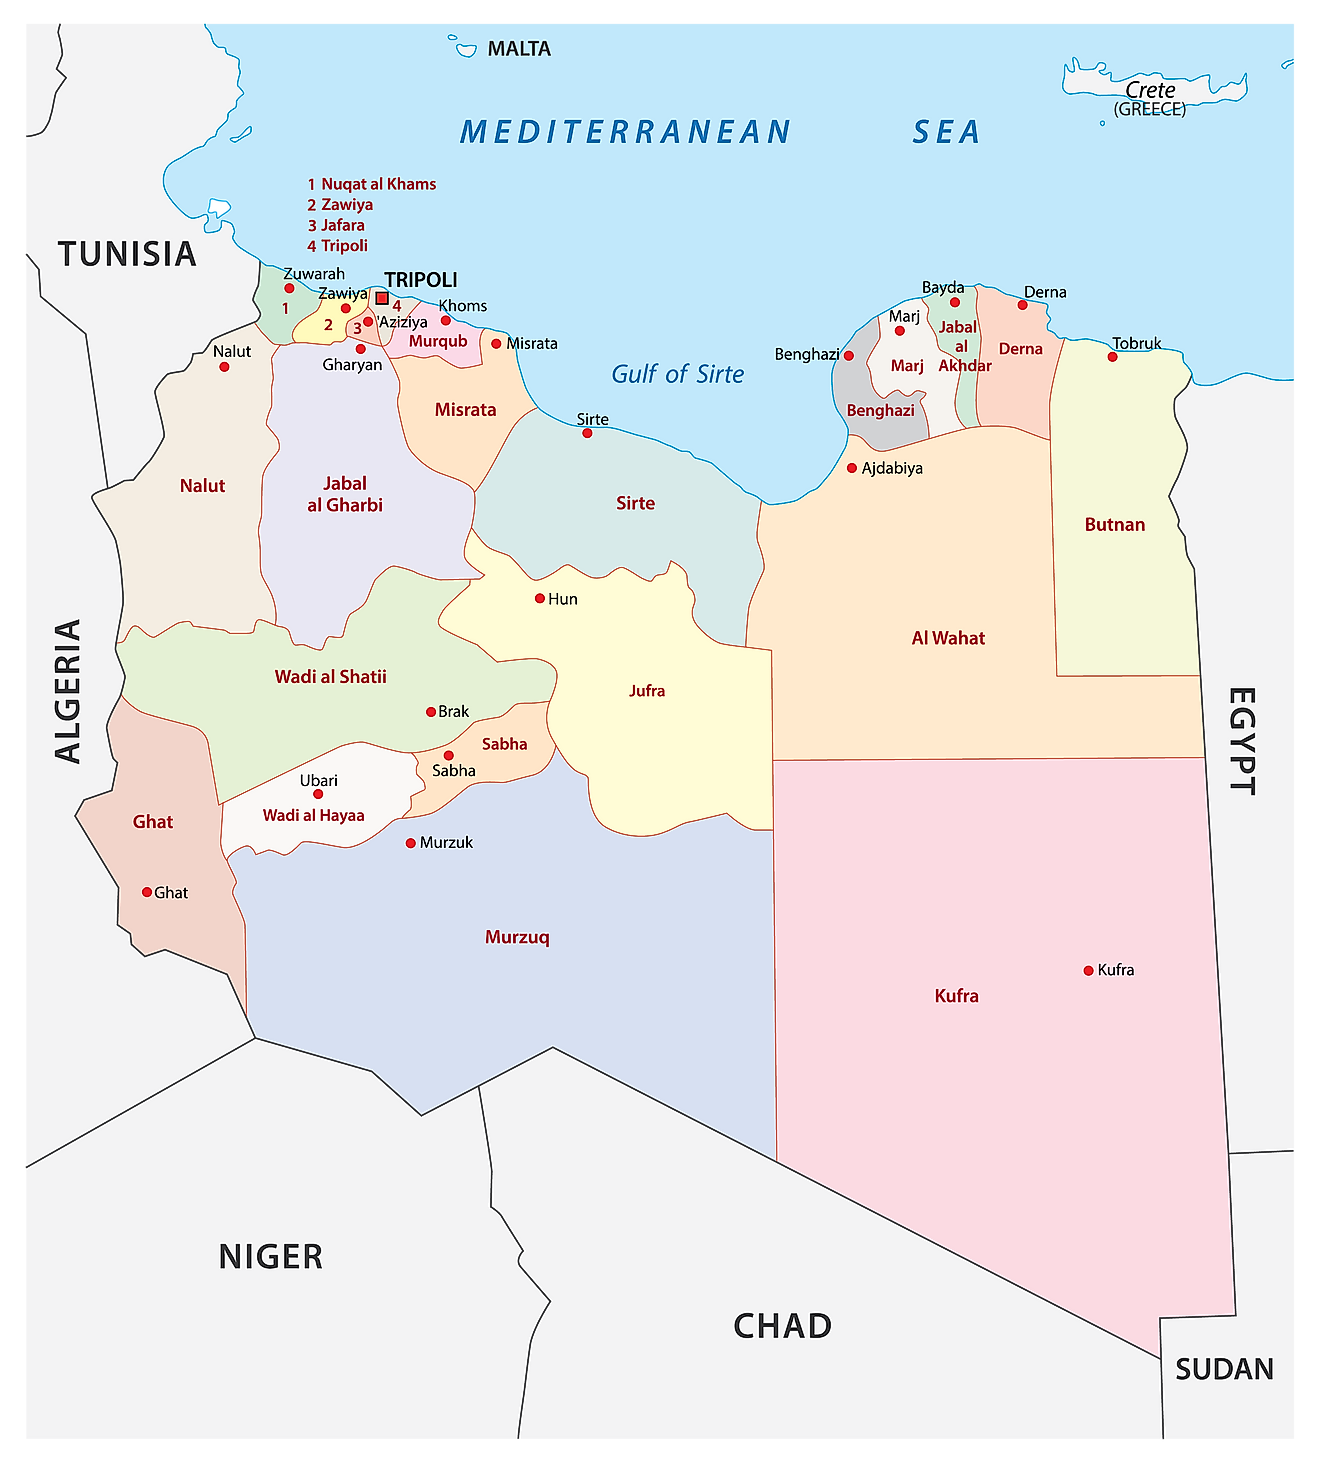 The Political Map of Libya showing its 22 governorates and national capital of Tripoli.